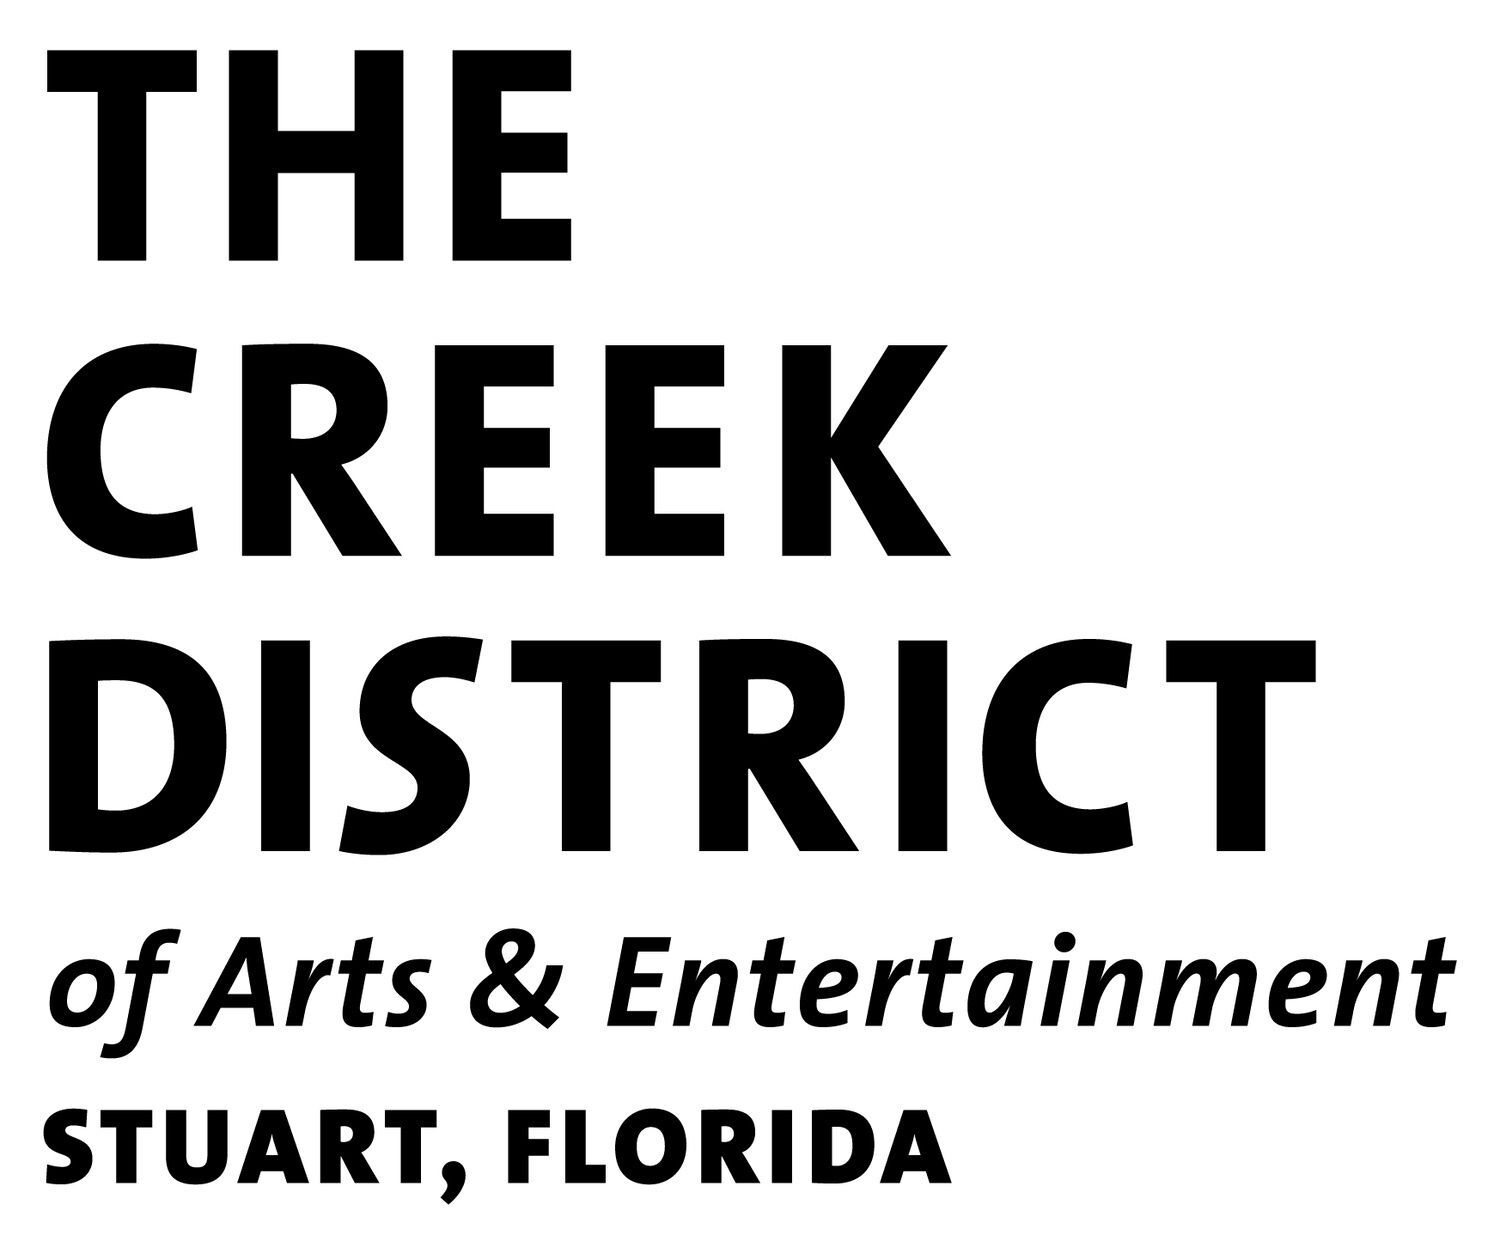 THe Creek District of Arts & Entertainment